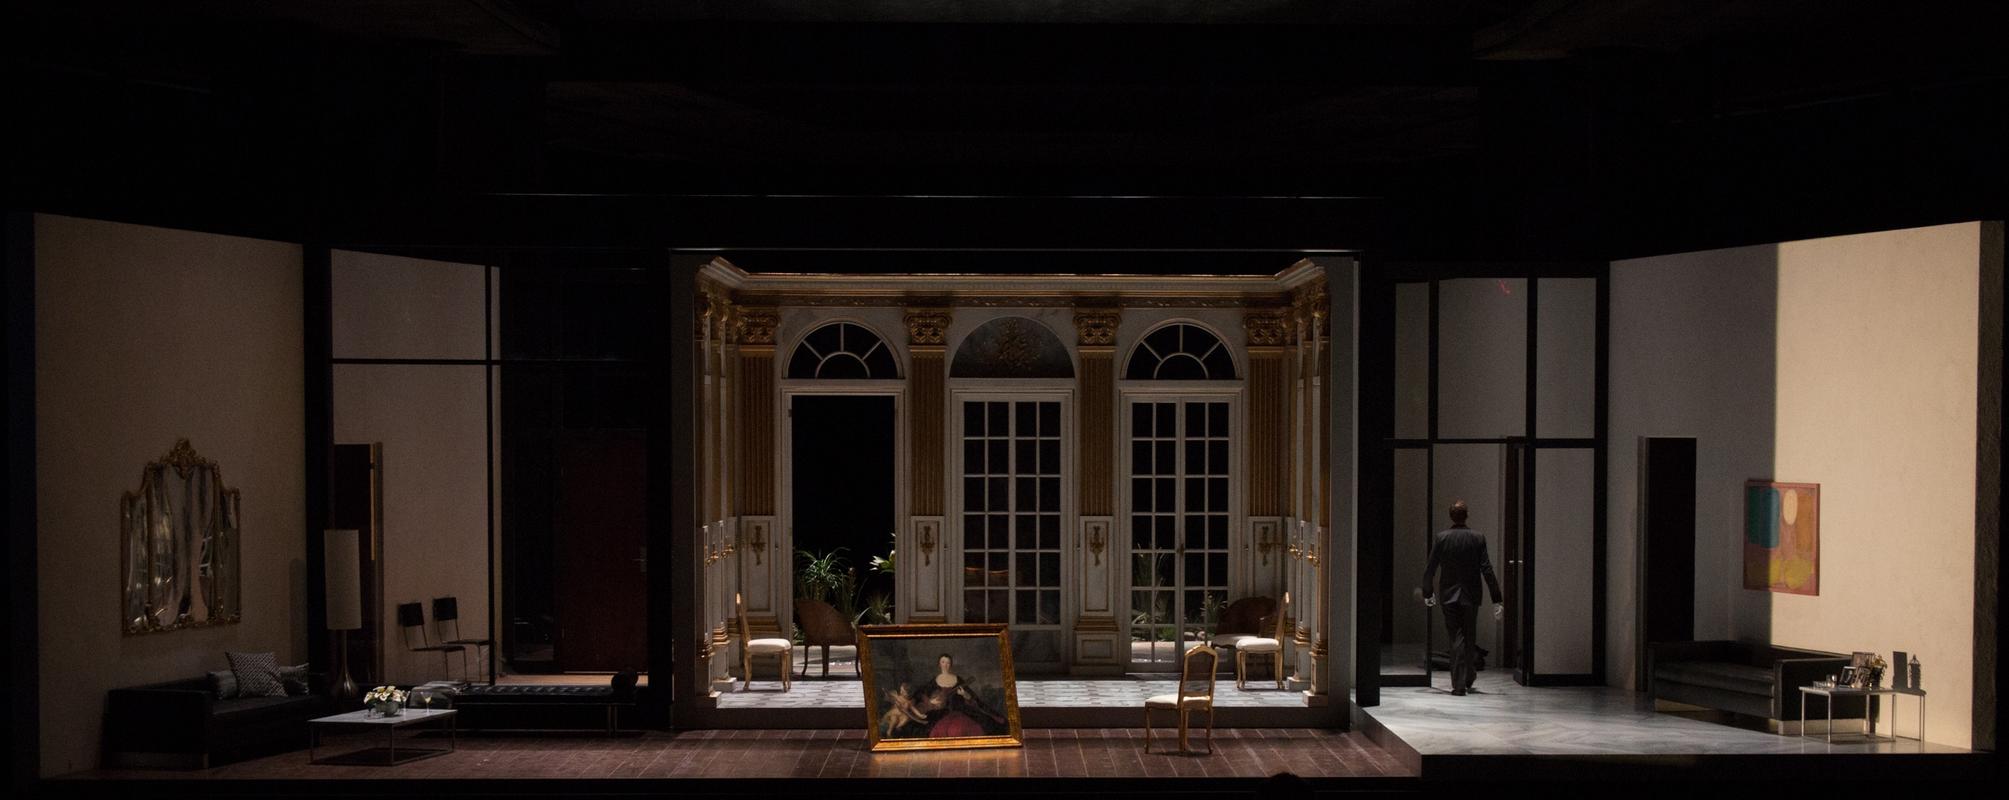 Photograph from Capriccio - lighting design by Malcolm Rippeth